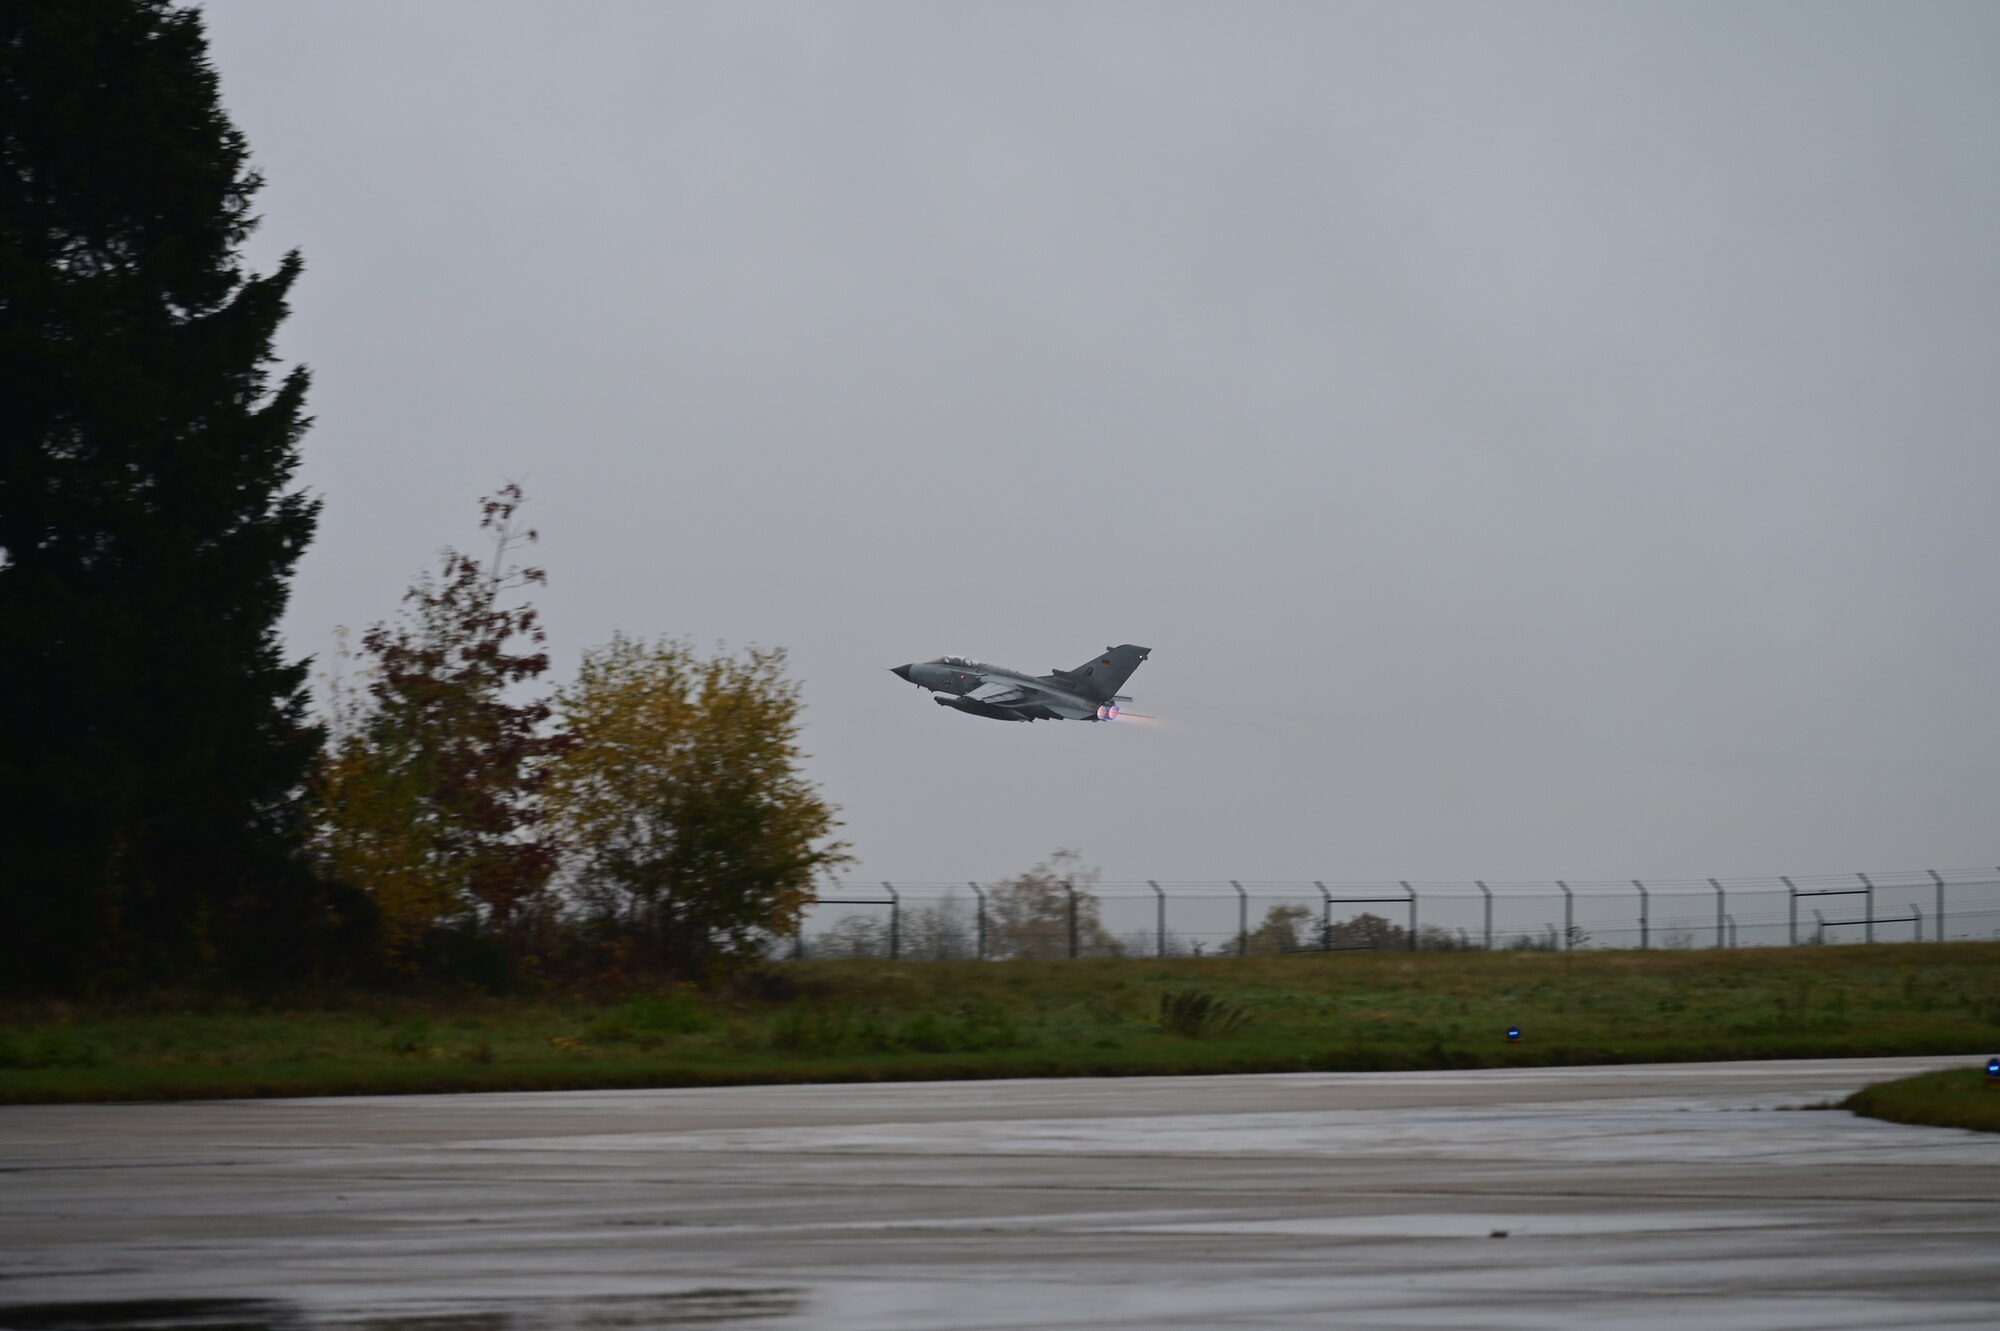 A German Air Force Tornado fighter jet takes off from Büchel Air Base, Germany, during Castle Forge, a MAJCOM-wide  Agile Combat Employment Initial Operating Capability event,  Nov. 4, 2021. Participation in multinational exercises like Castle Forge enhances our professional relationships and improves overall coordination with allies and partner militaries during times of crisis. (Courtesy photo by Dr. Sandeep Mulgund)